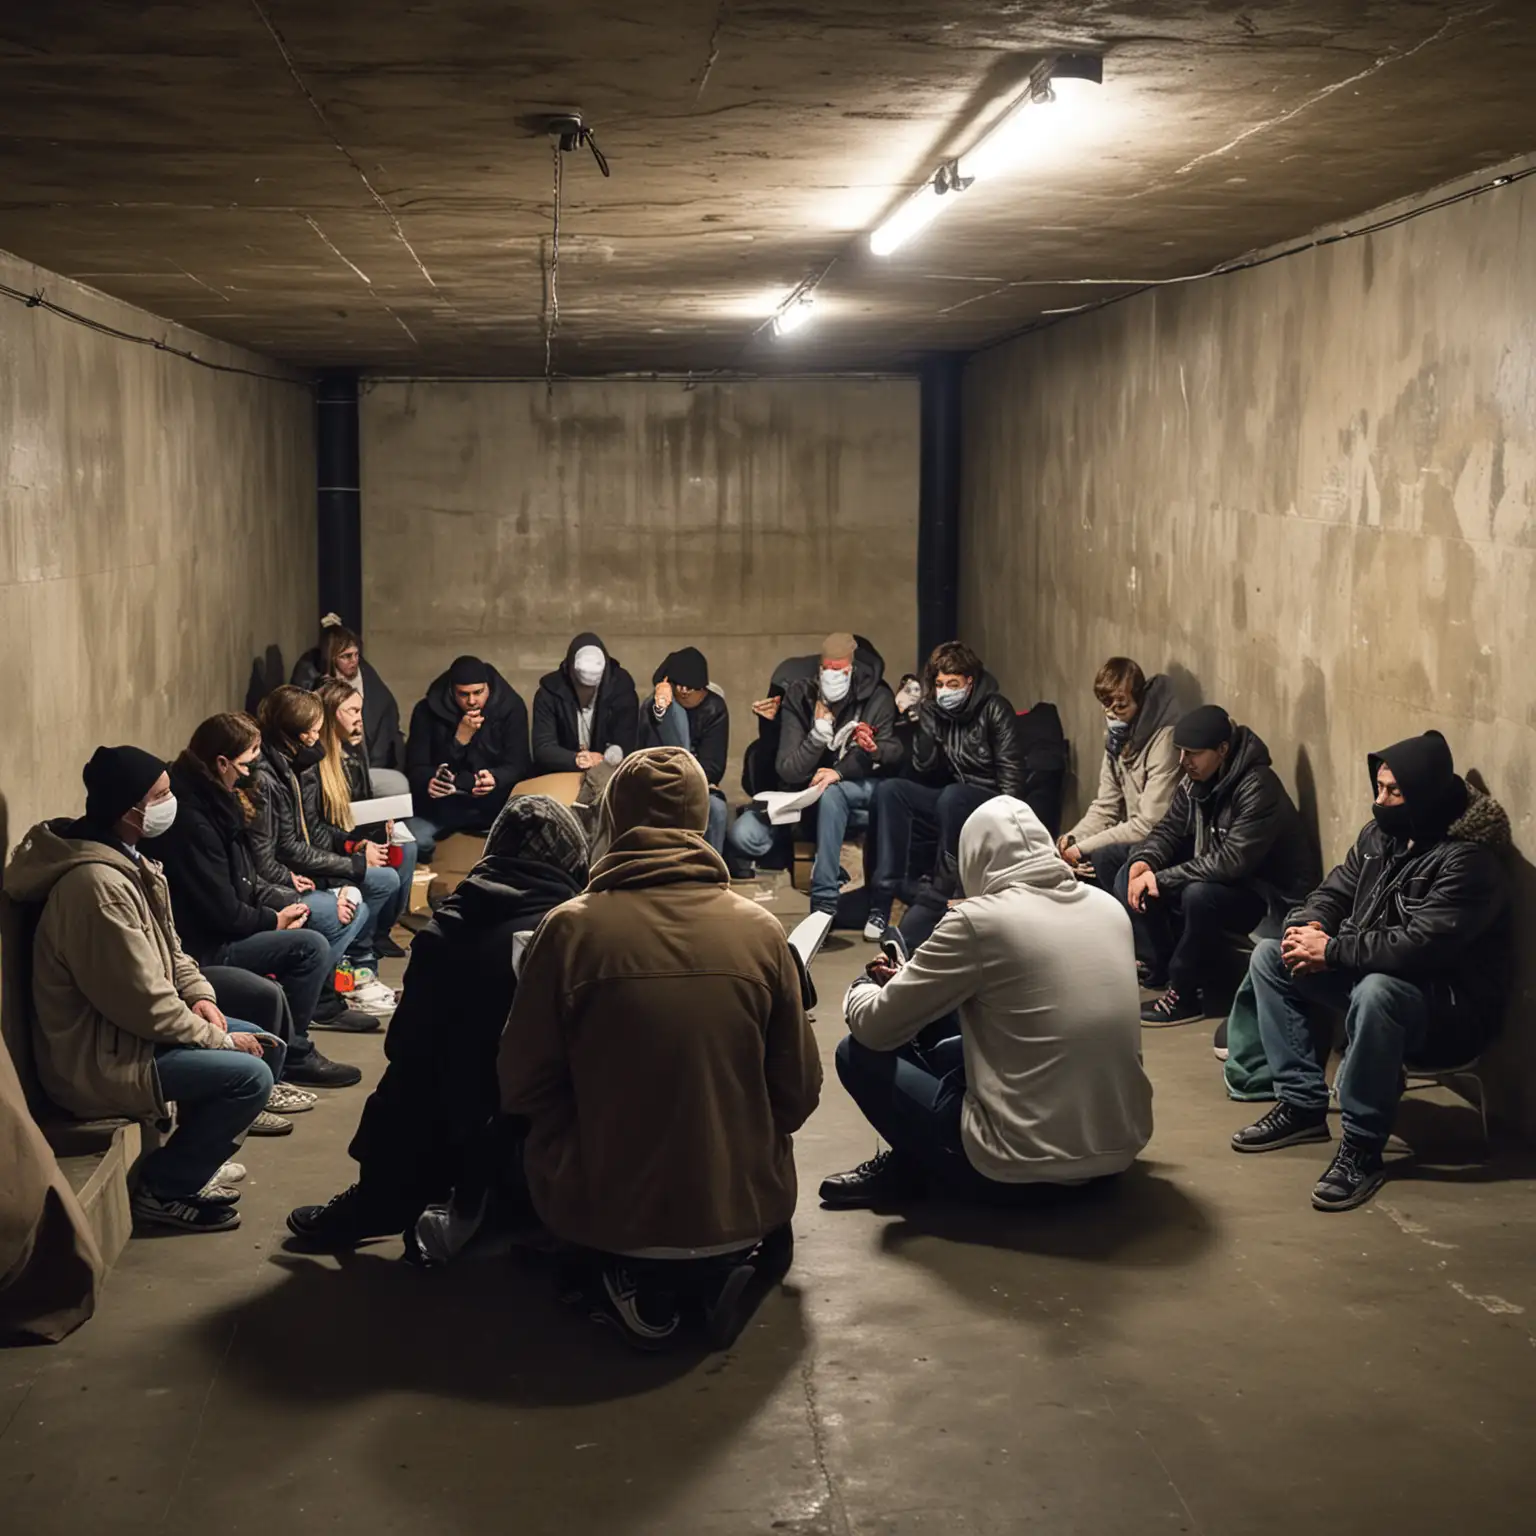 Support Group Meeting for Addiction Recovery in Basement Setting